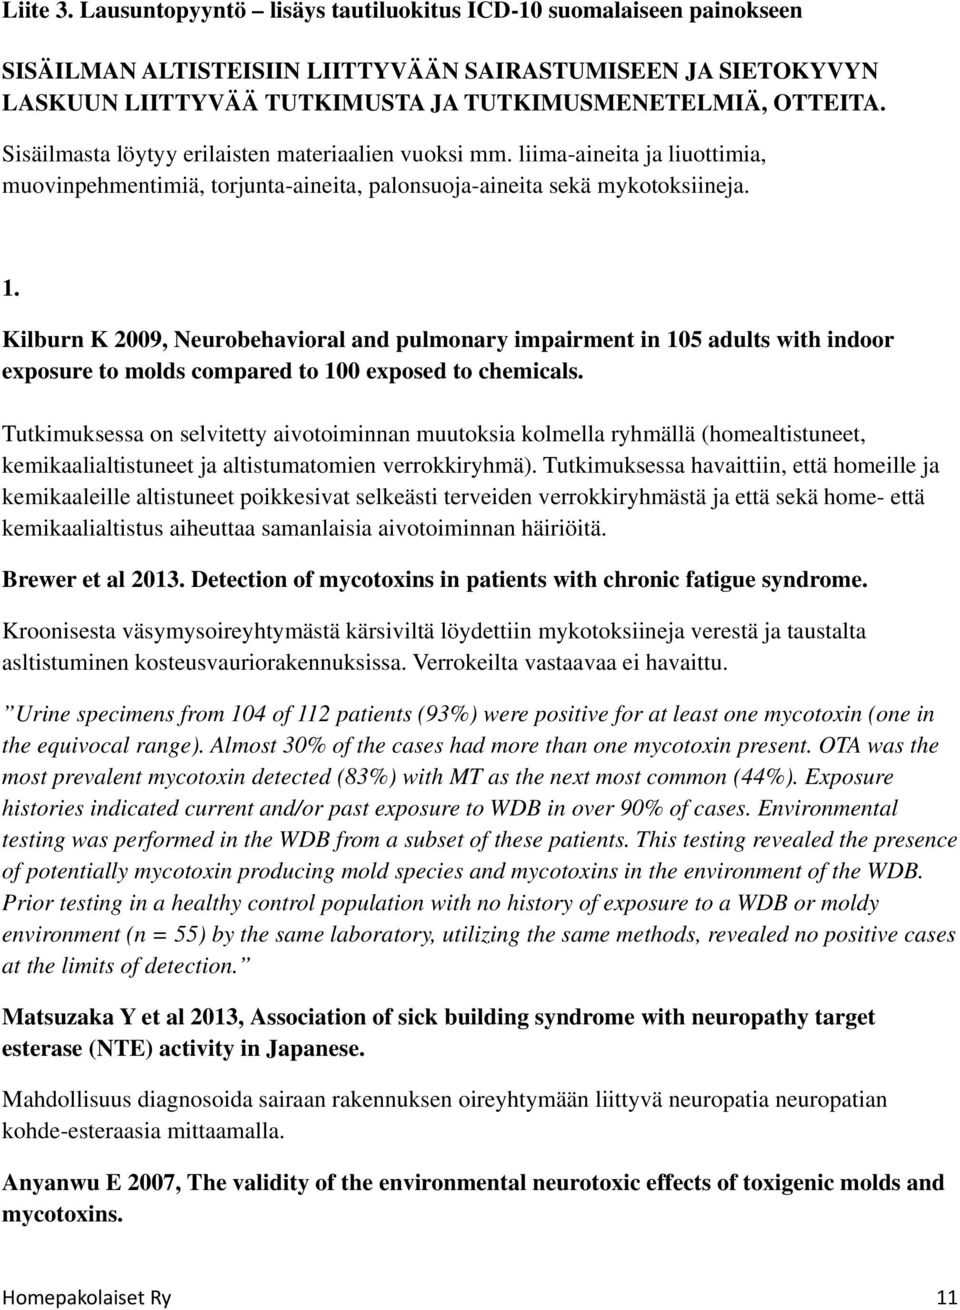 Kilburn K 2009, Neurobehavioral and pulmonary impairment in 105 adults with indoor exposure to molds compared to 100 exposed to chemicals.